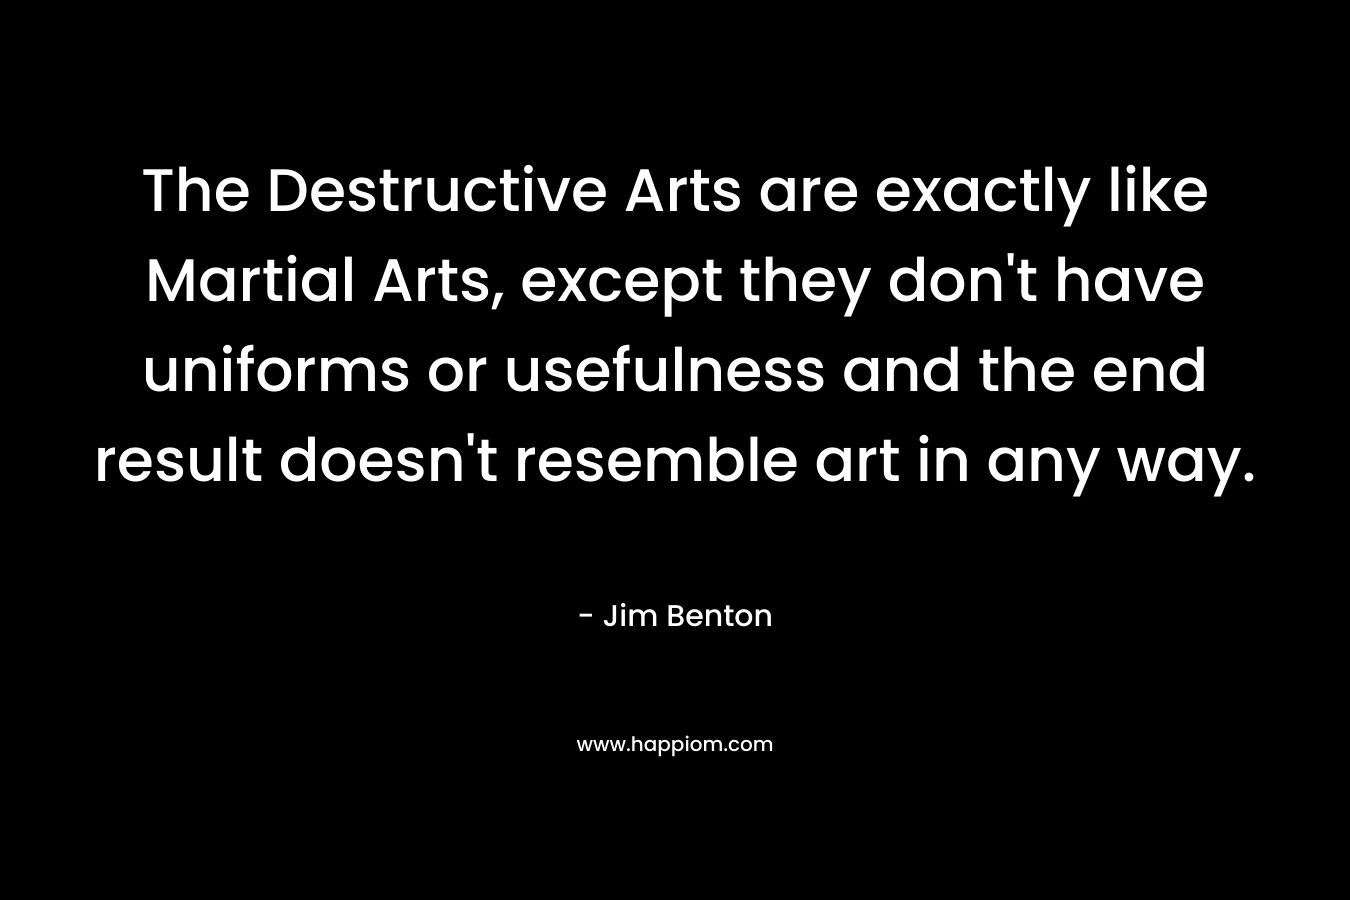 The Destructive Arts are exactly like Martial Arts, except they don't have uniforms or usefulness and the end result doesn't resemble art in any way.